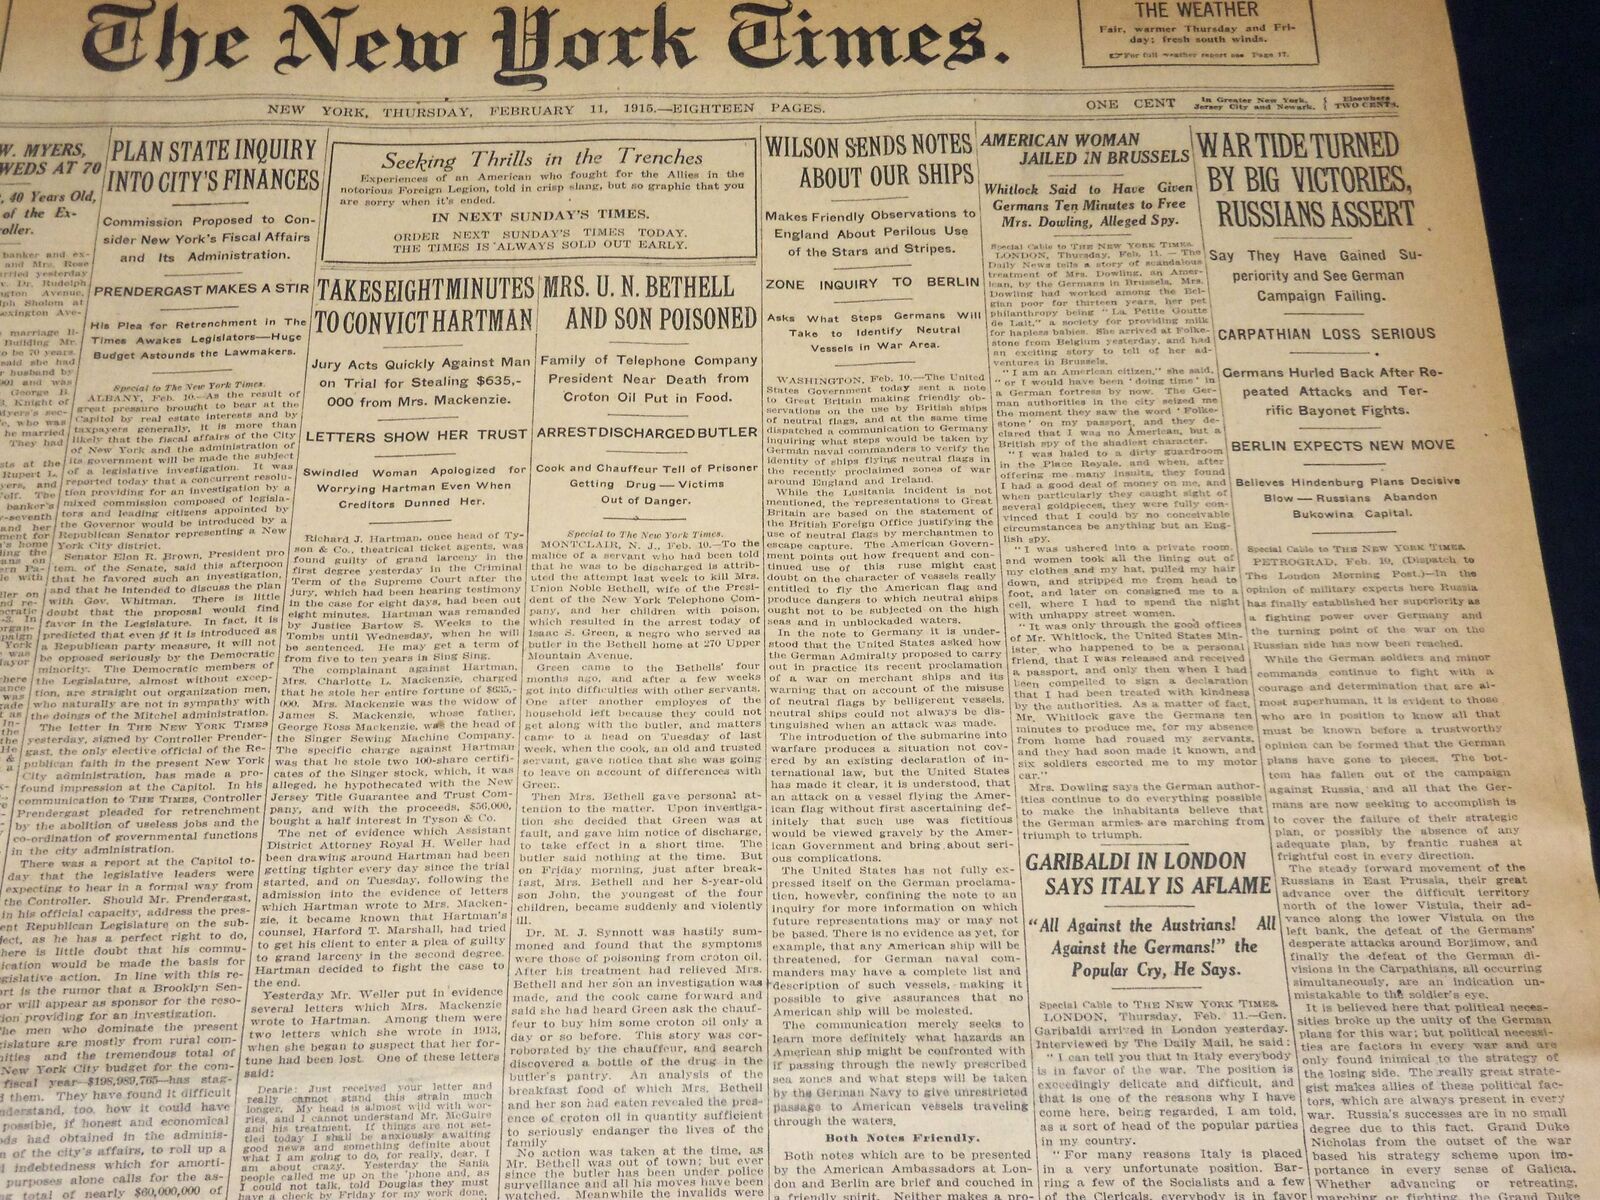 1915 FEBRUARY 11 NEW YORK TIMES - WILSON SENDS NOTES ABOUT OUR SHIPS - NT 7771